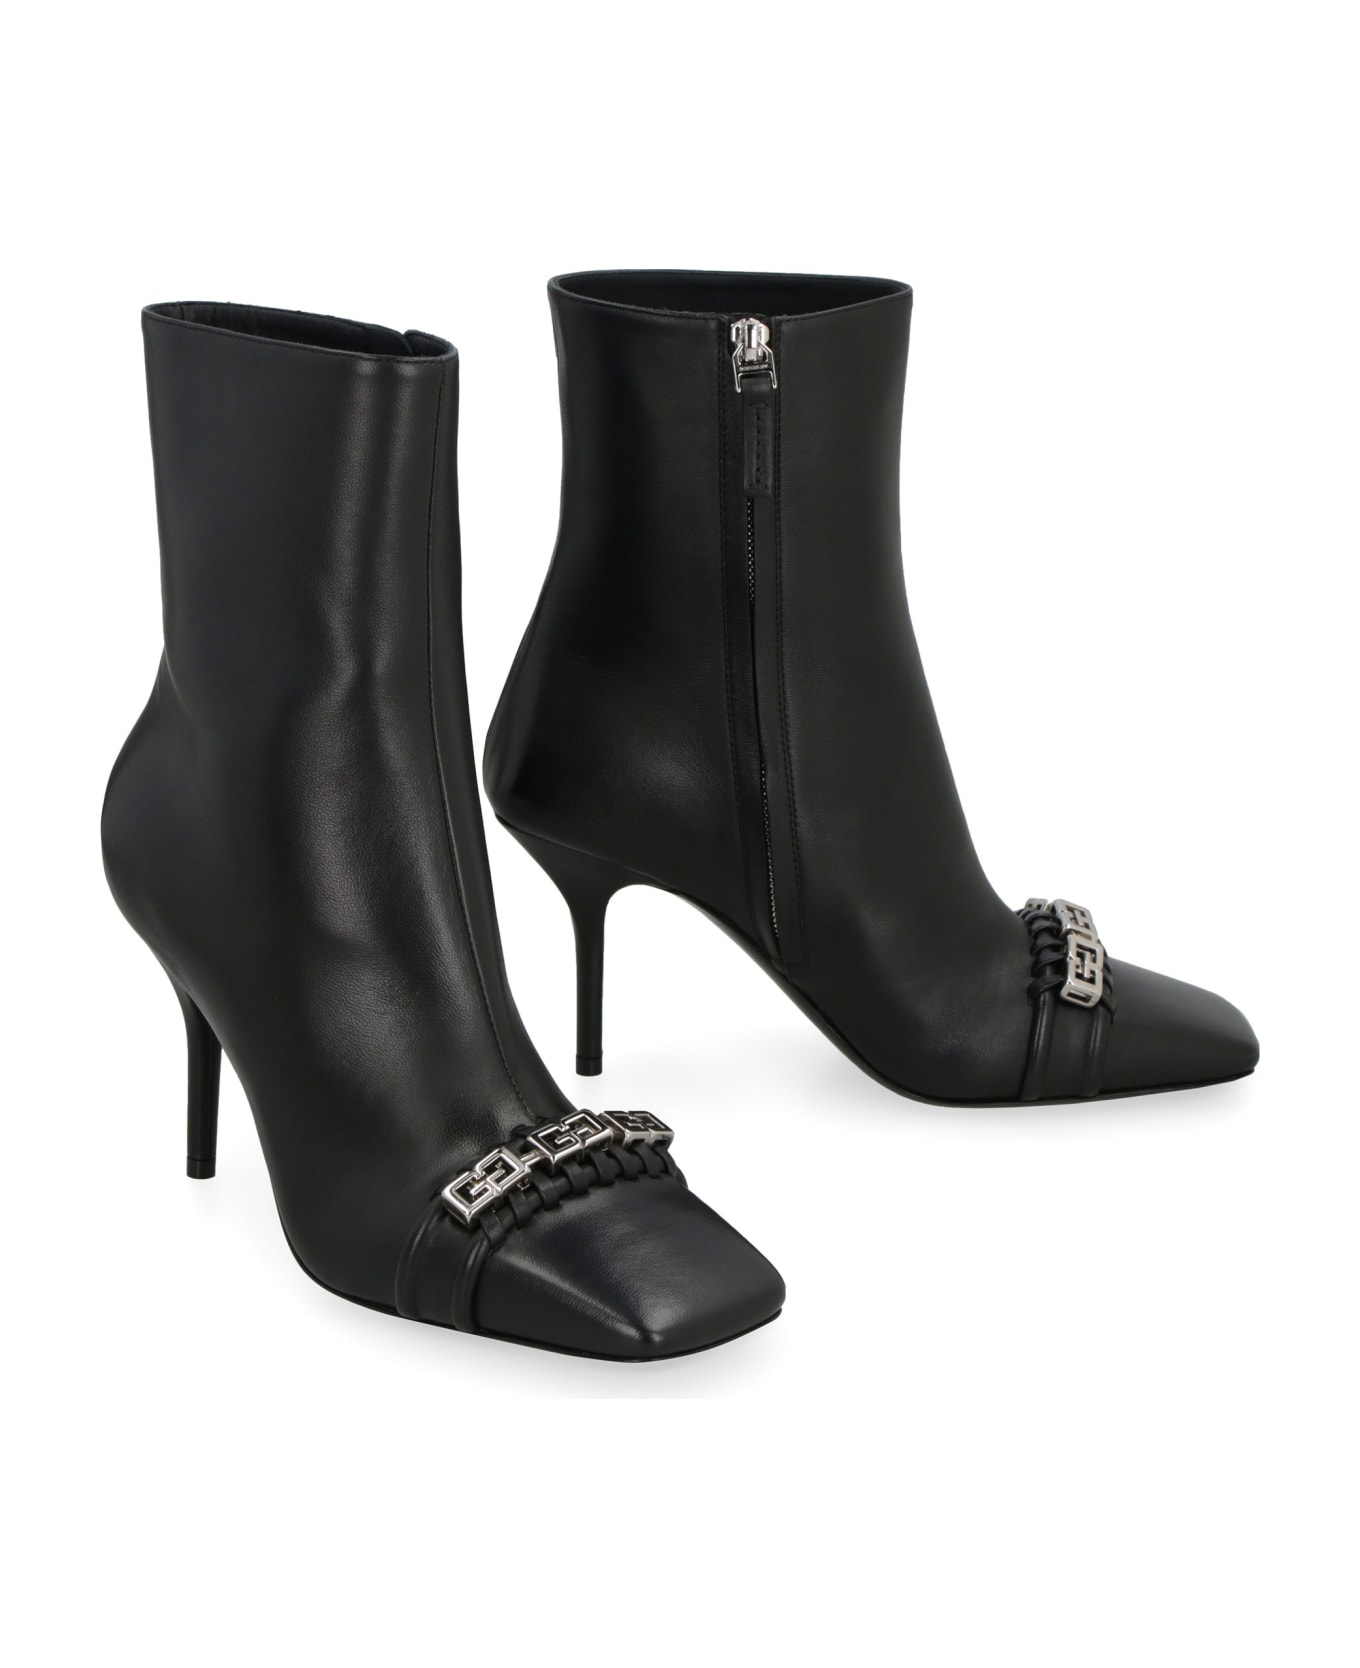 Givenchy G Woven Leather Ankle Boots - black